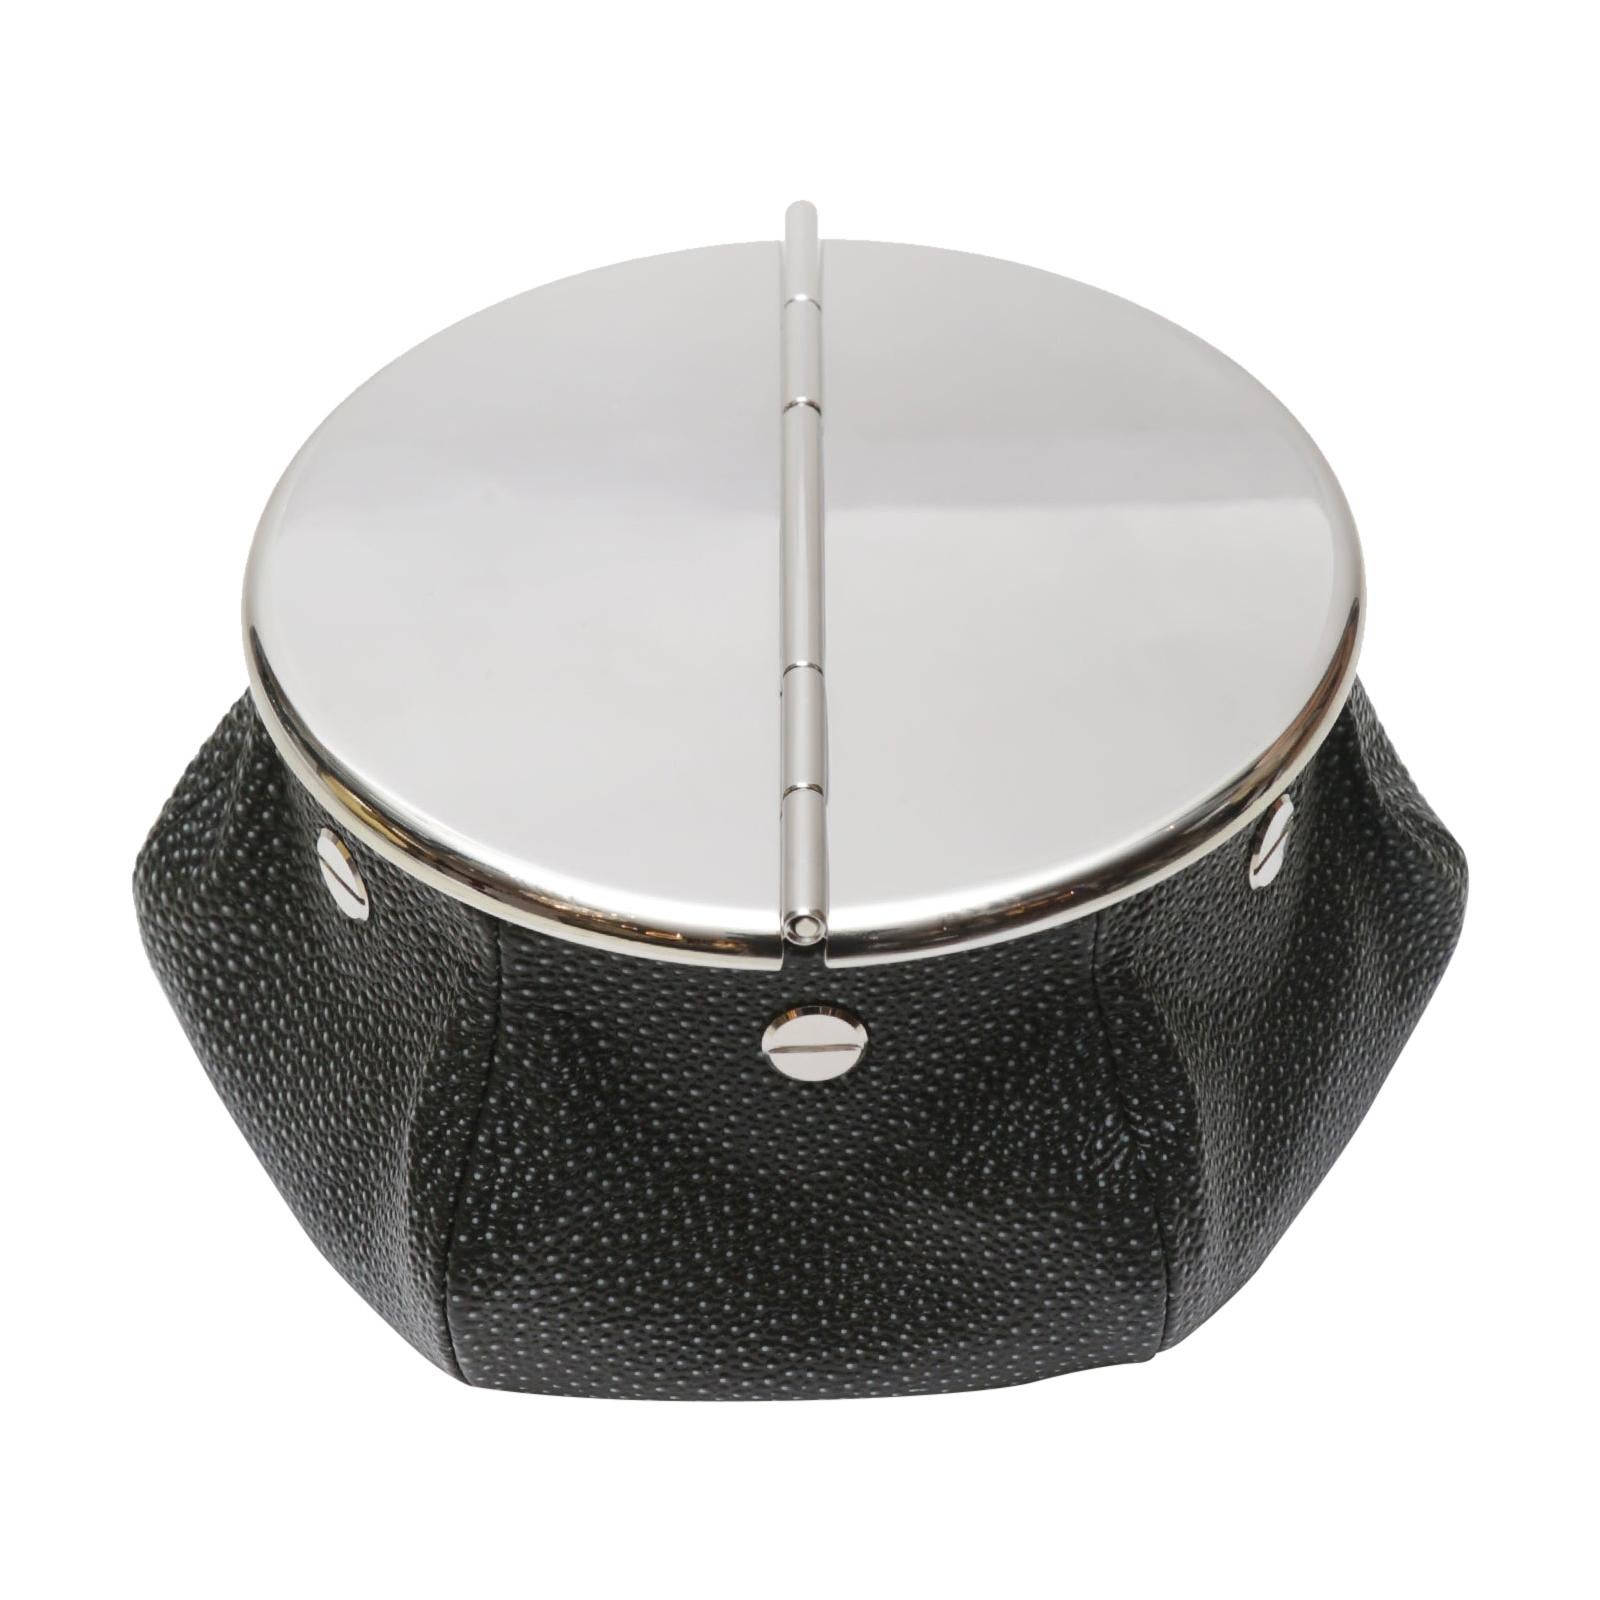 Ashtray black shagreen 2 cigars yachting with bag covered
with black shagreen finish printed on calfskin with black stitching.
Bag filled with 1 kg micro metal balls that give high stability.
Ashtray top with 2 openable lids in solid brass in